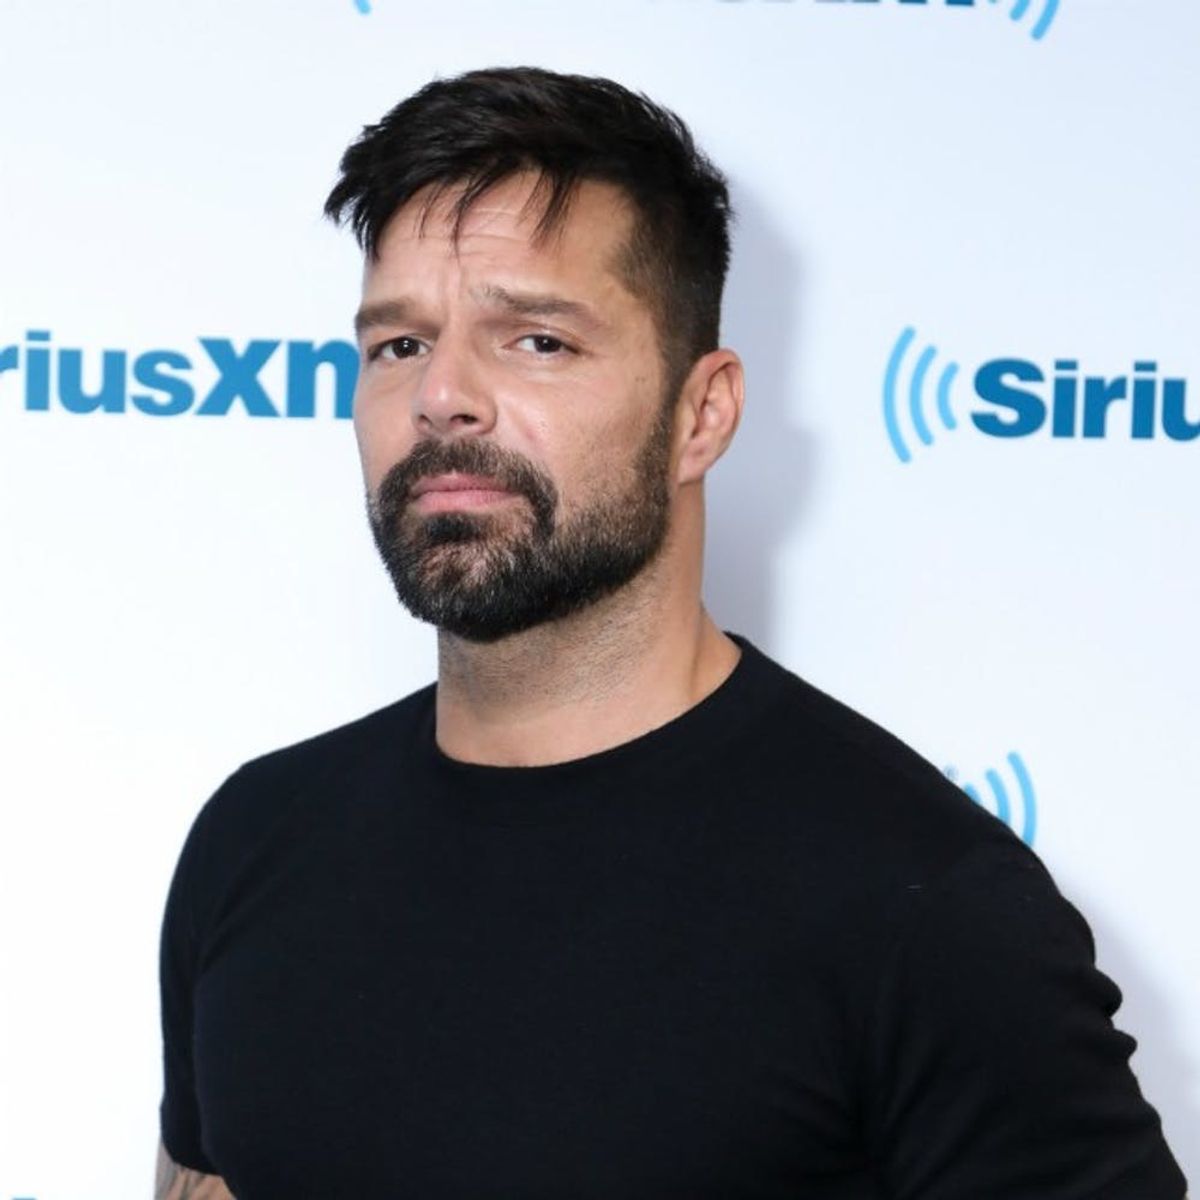 Ricky Martin Decided to Play His First Gay Character in Part to Call Out Homophobia